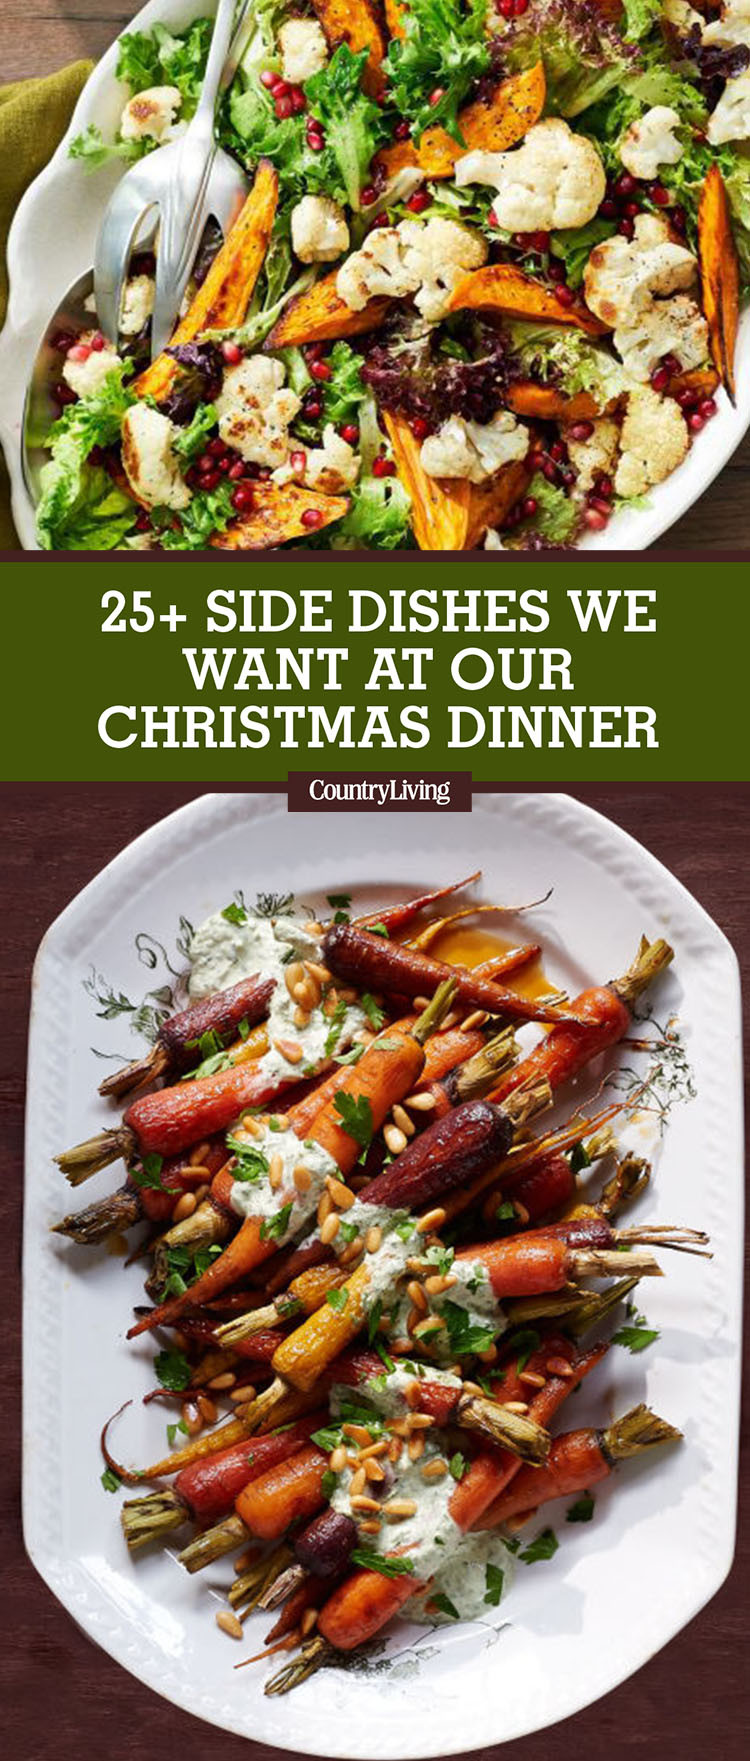 Easy Christmas Dinner Side Dishes
 30 Easy Christmas Side Dishes Best Recipes for Holiday